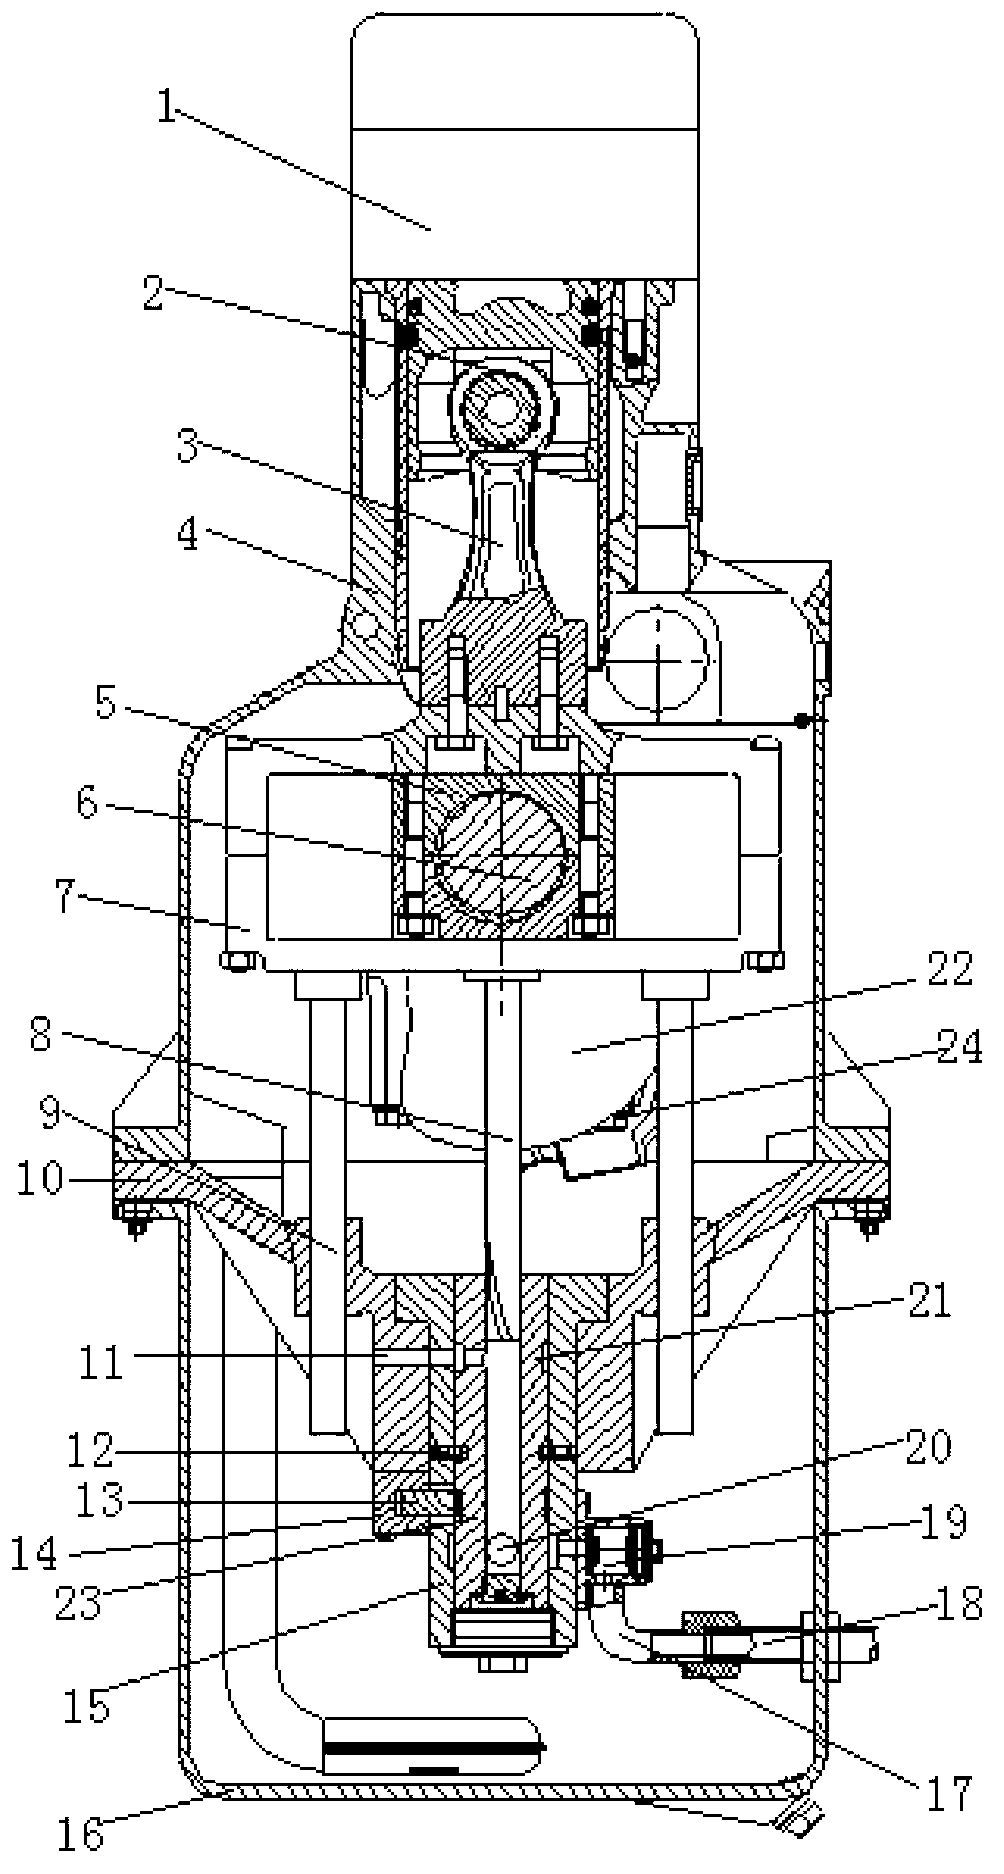 Double-power engine with adjustable hydraulic and mechanical power output ratio